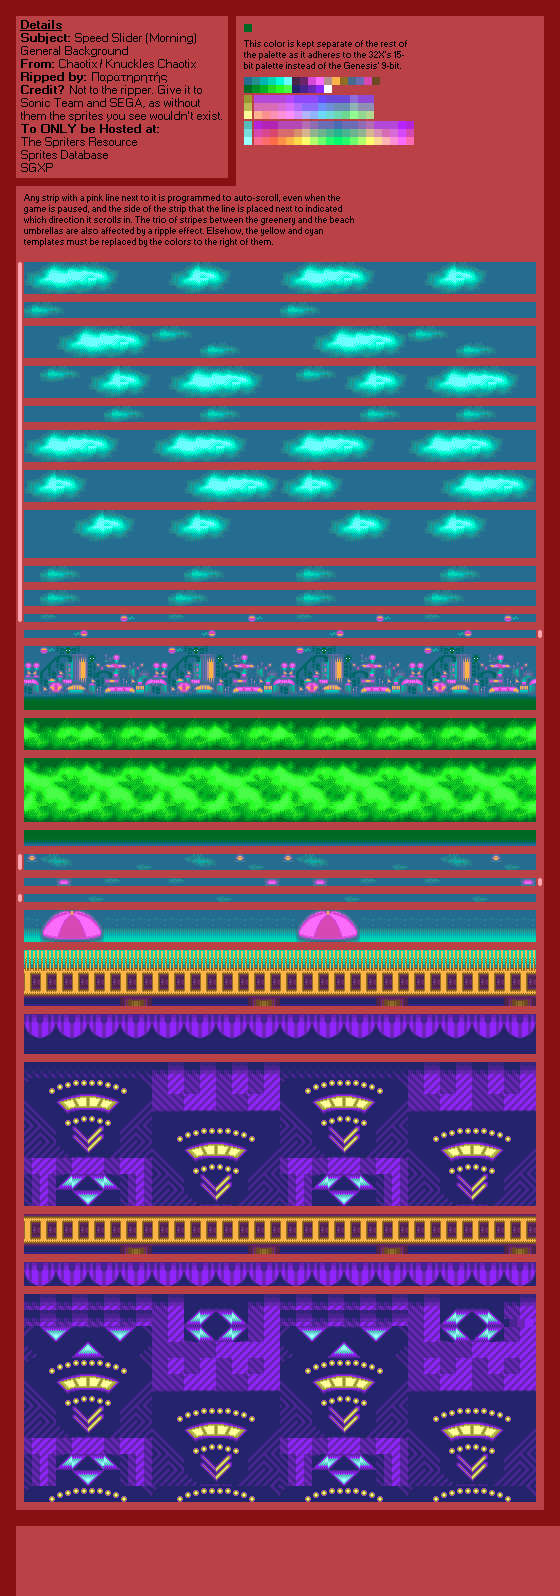 Knuckles' Chaotix (32X) - Speed Slider (Starting Area, Morning)